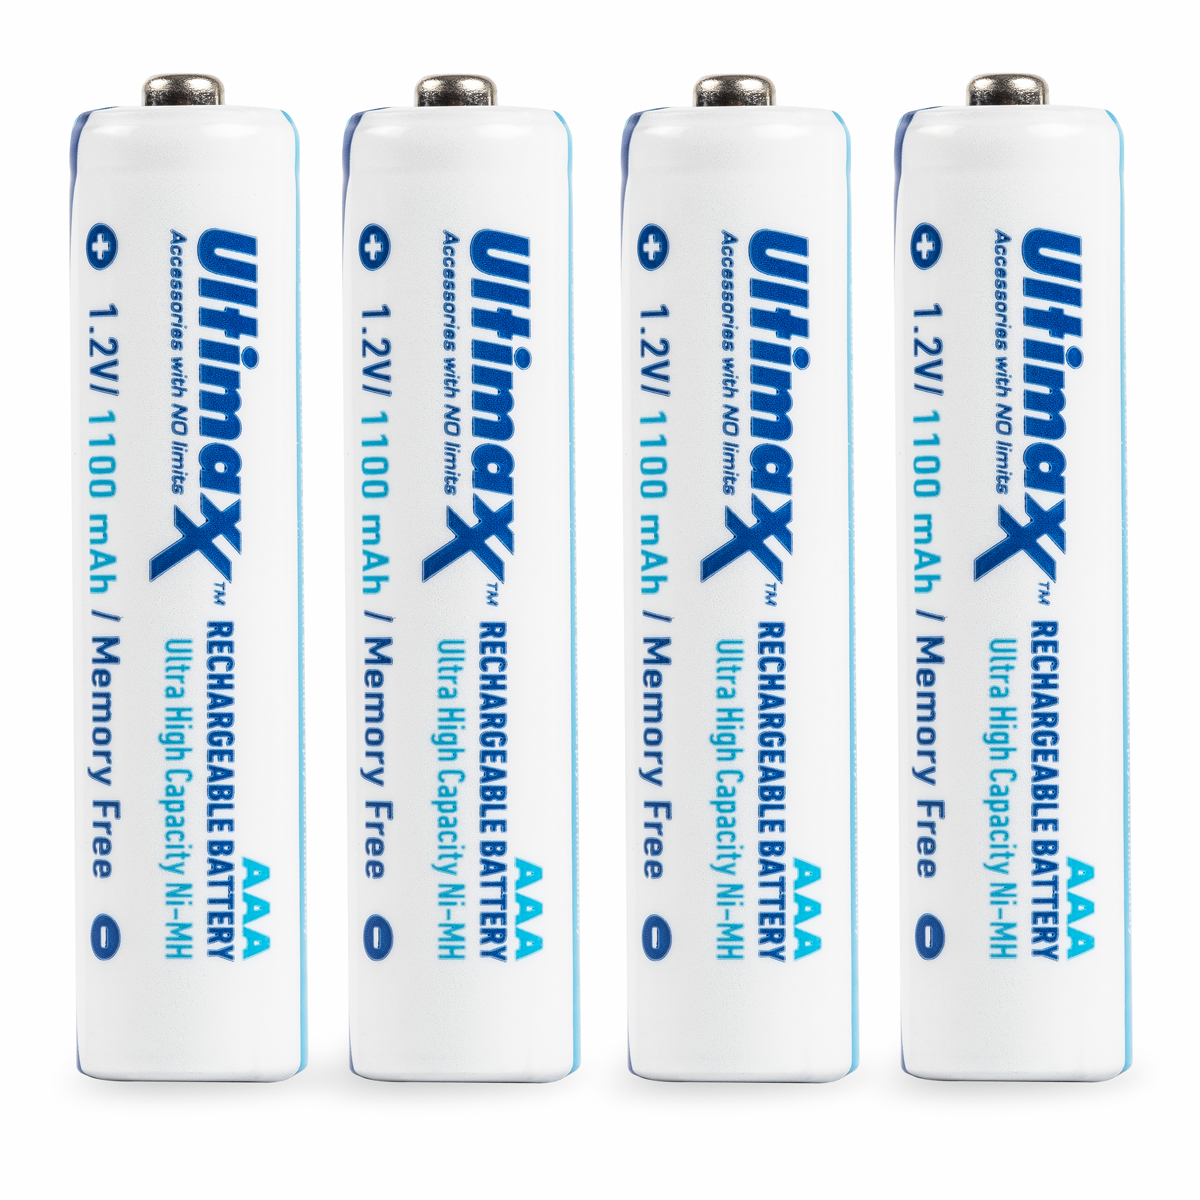 ULTIMAXX Battery Charger for 8 AA AAA NiMH NiCD Rechargeable Batteries